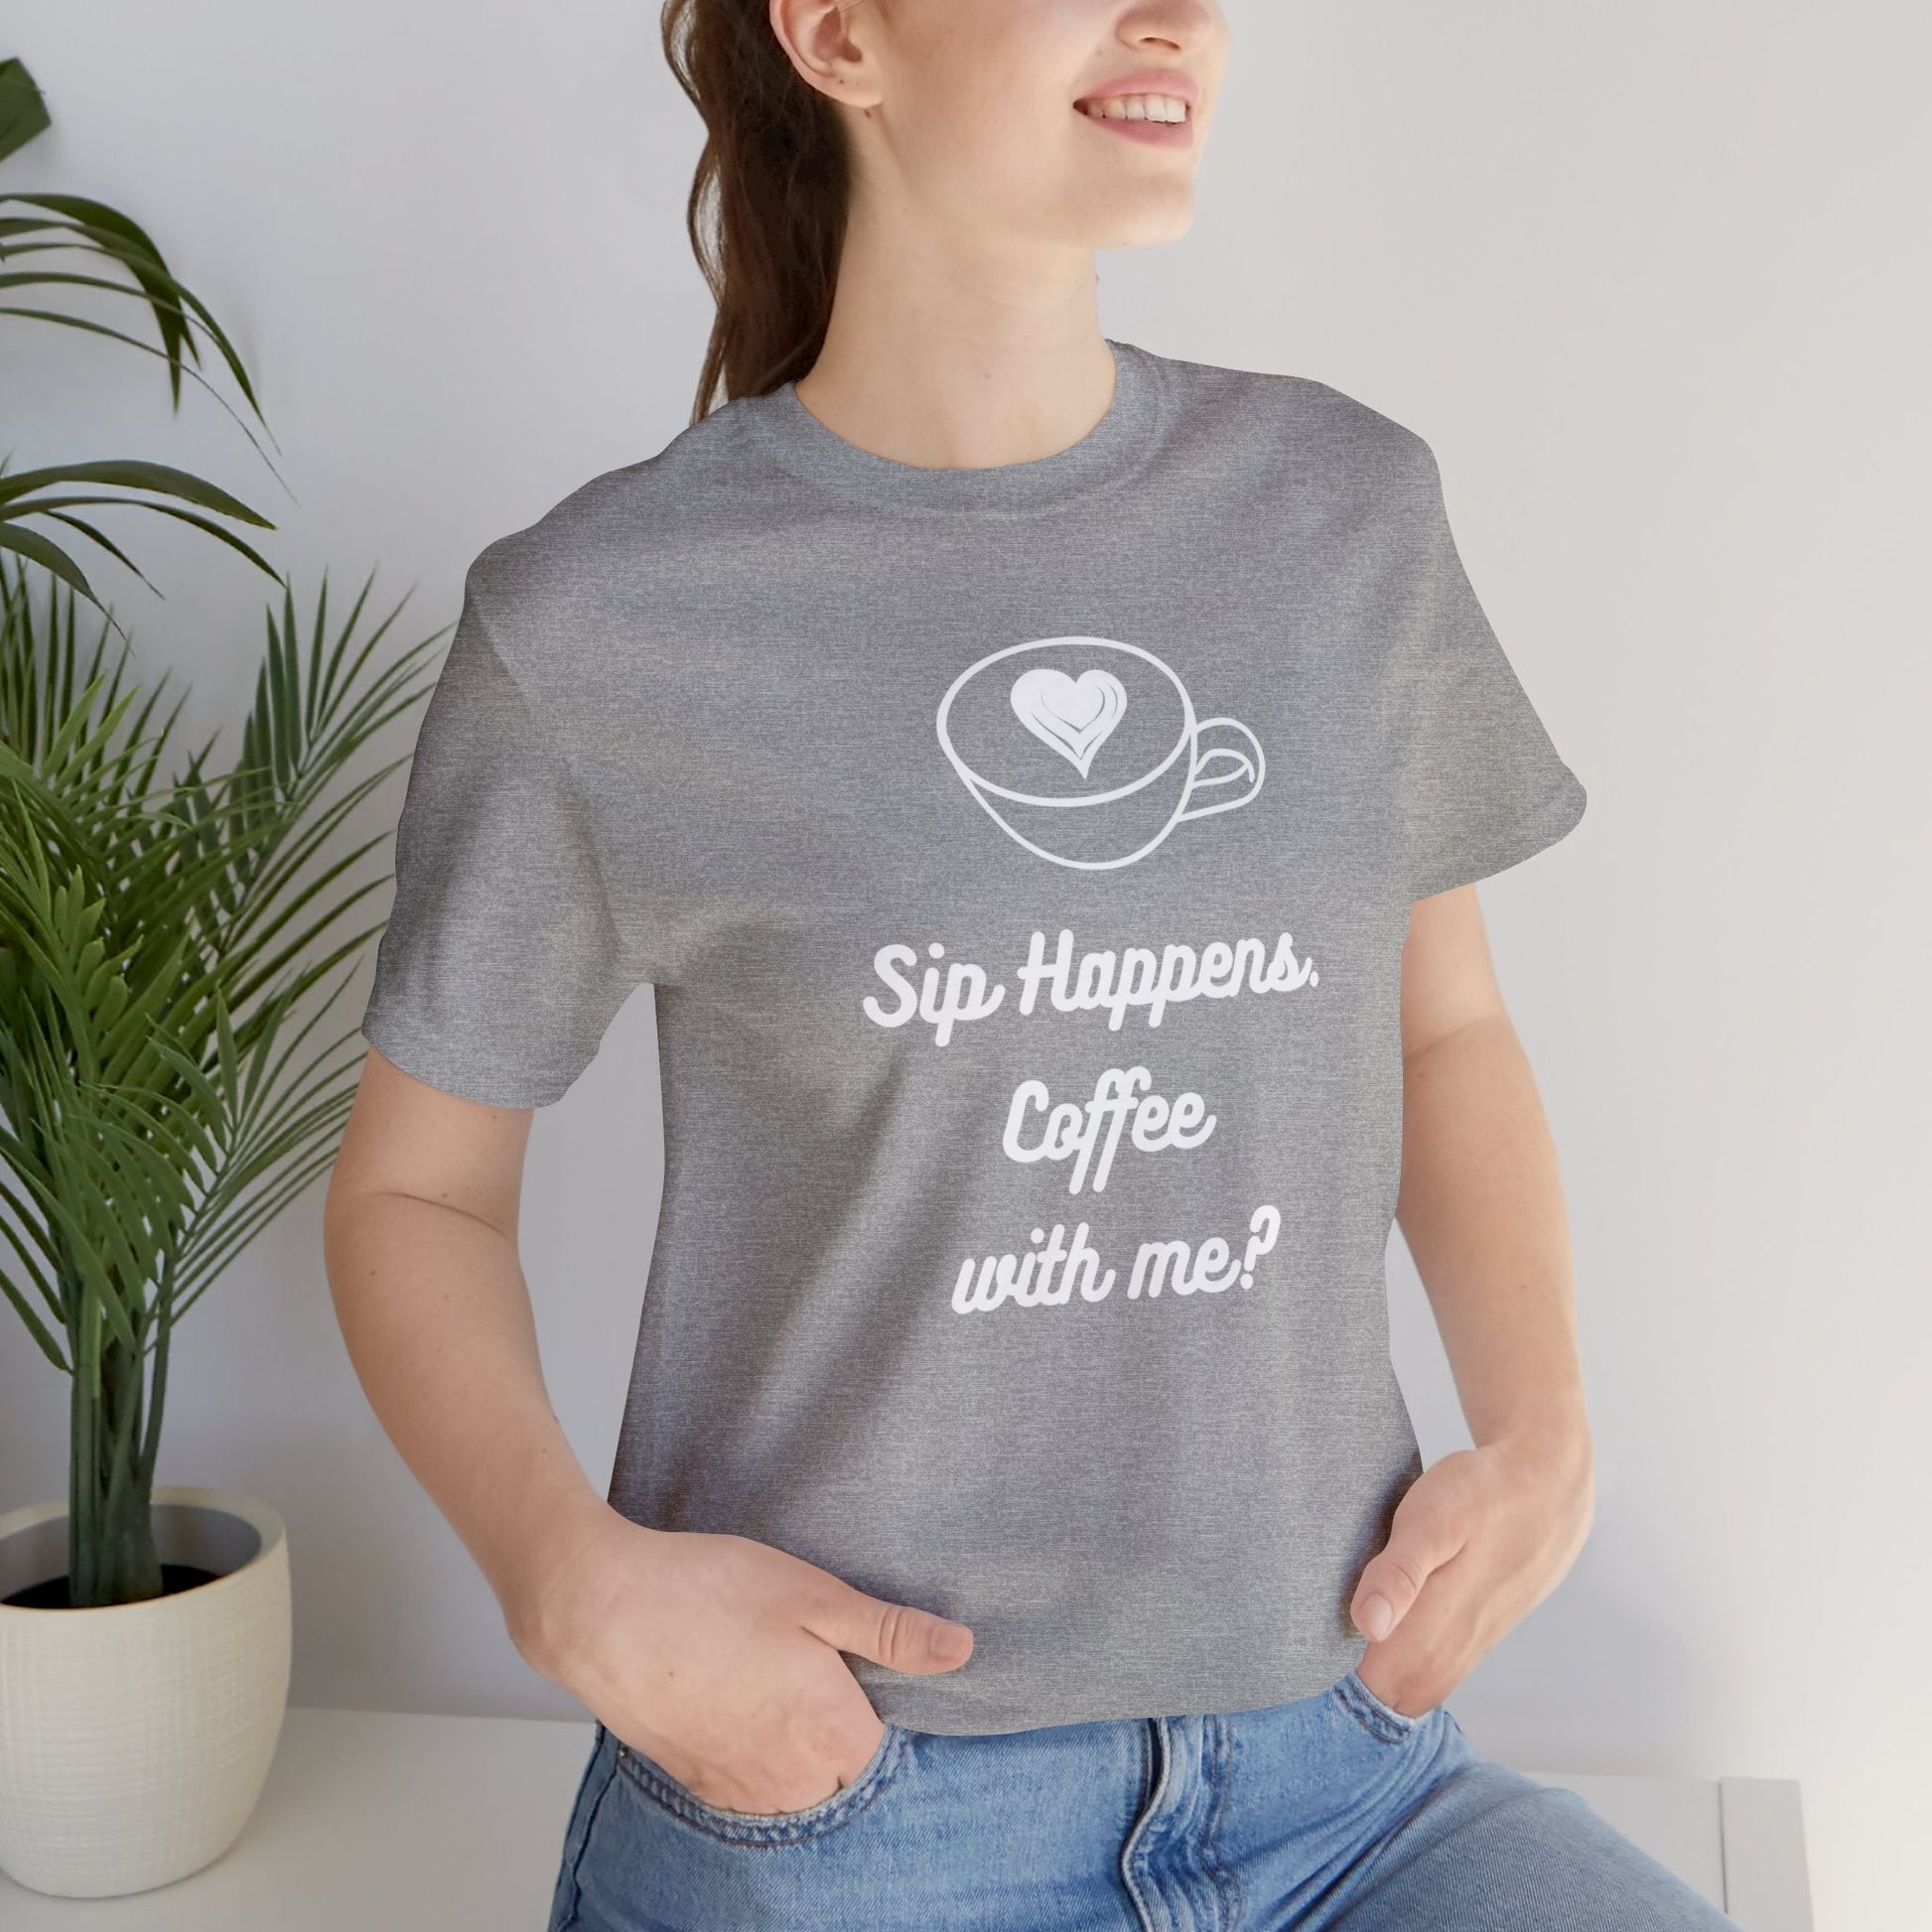 Sip Happens. Coffee with me? T-shirt. - InkArt Fashions